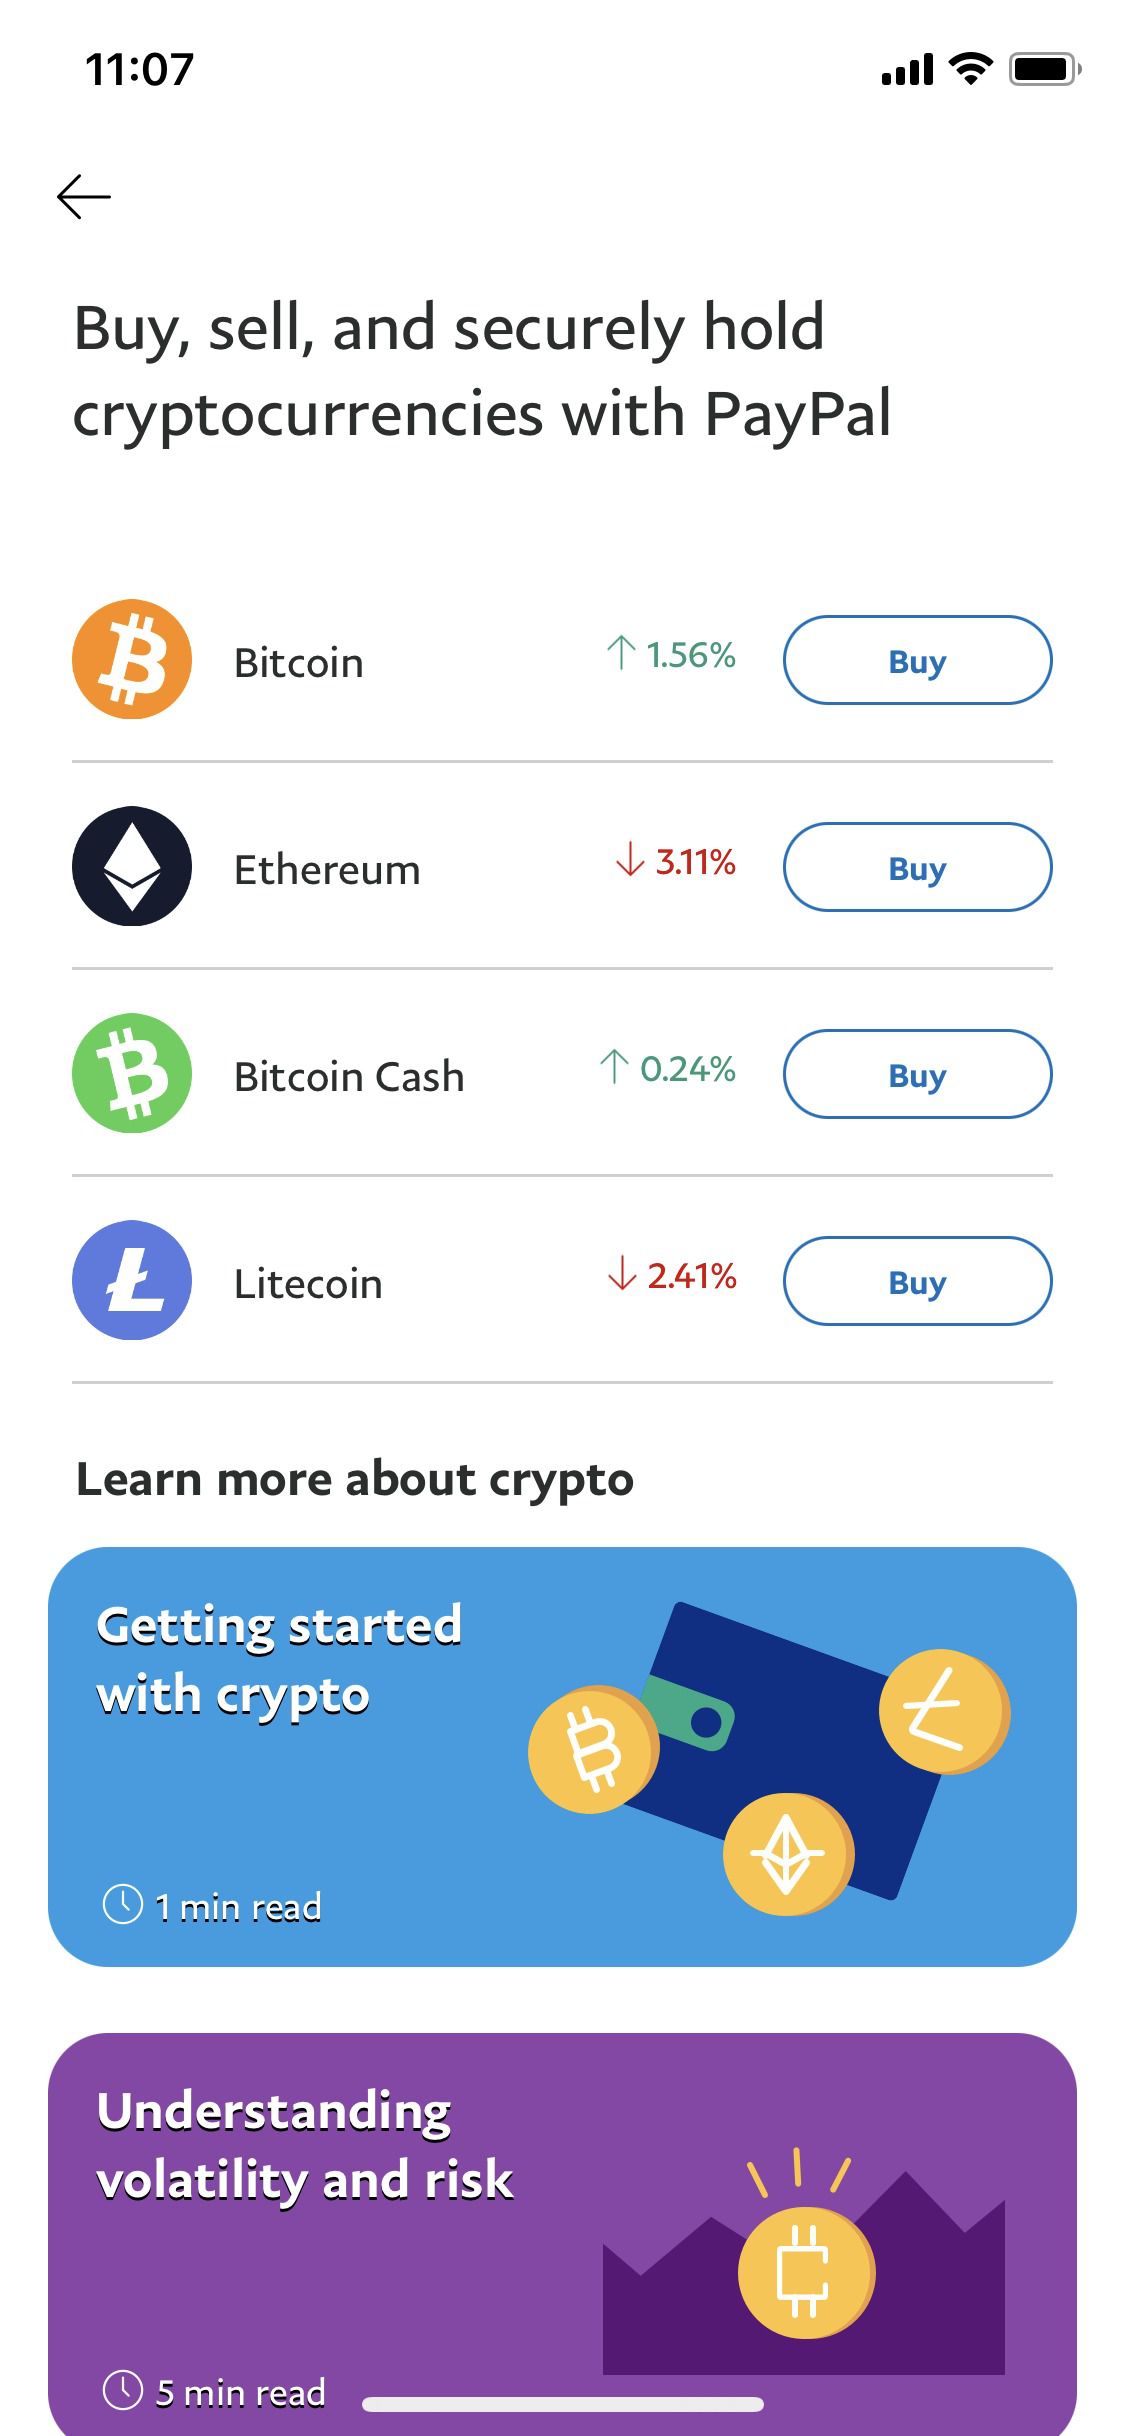 Purchasing Crypto with PayPal Wallet: Pros and Cons